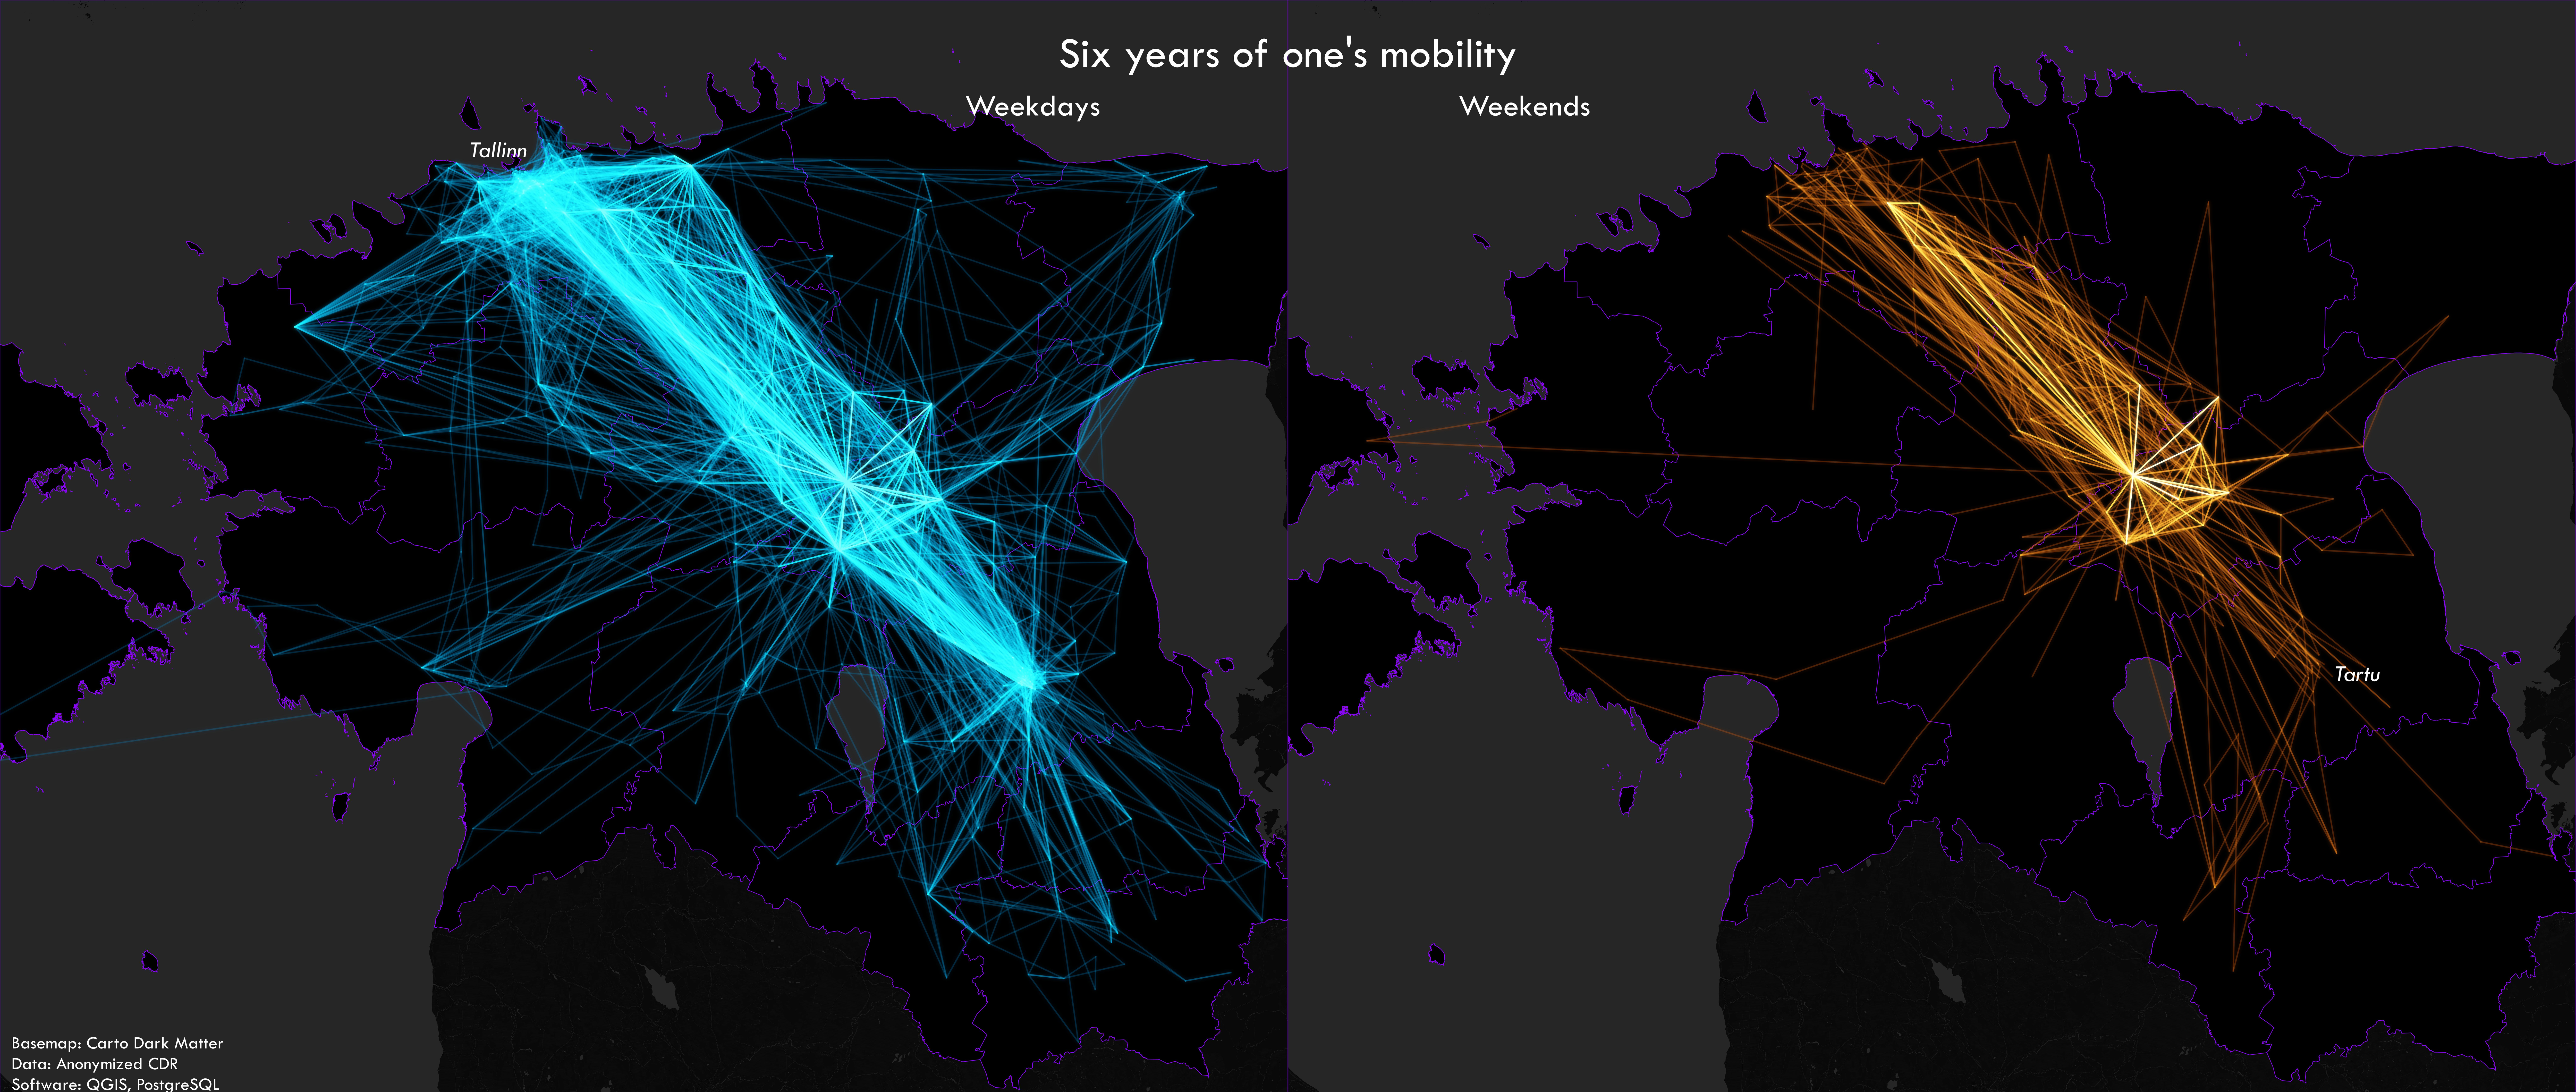 A person’s movement visualisation over six years on weekends and weekdays using CDR dataCDRs of a person over 6 years, connected with lines in a chronological order, weekends and weekdays.